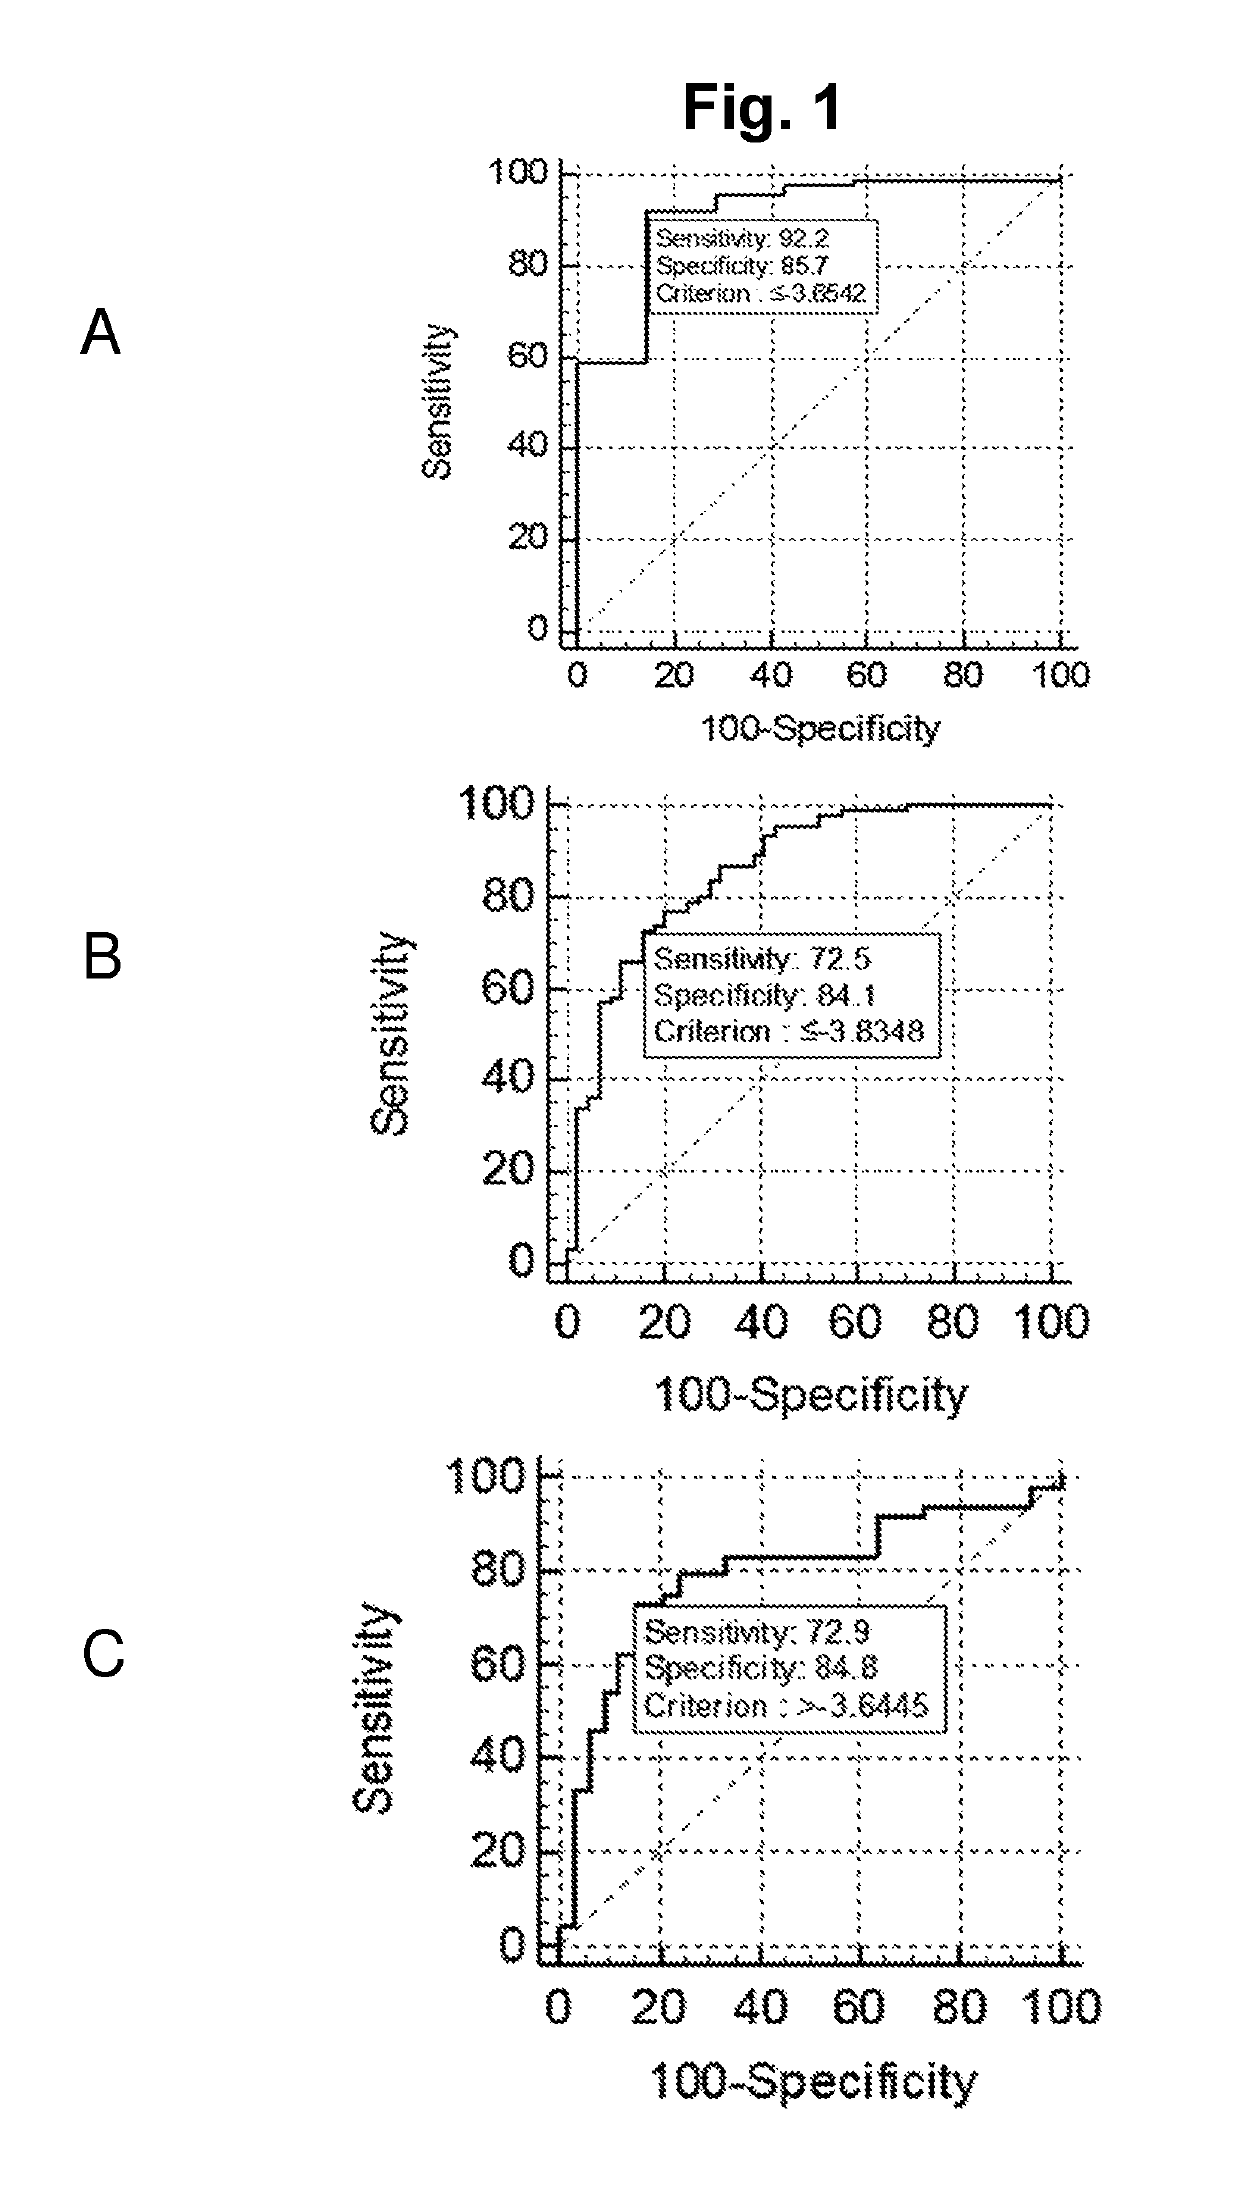 MicroRNA-based method for early detection of prostate cancer in urine samples